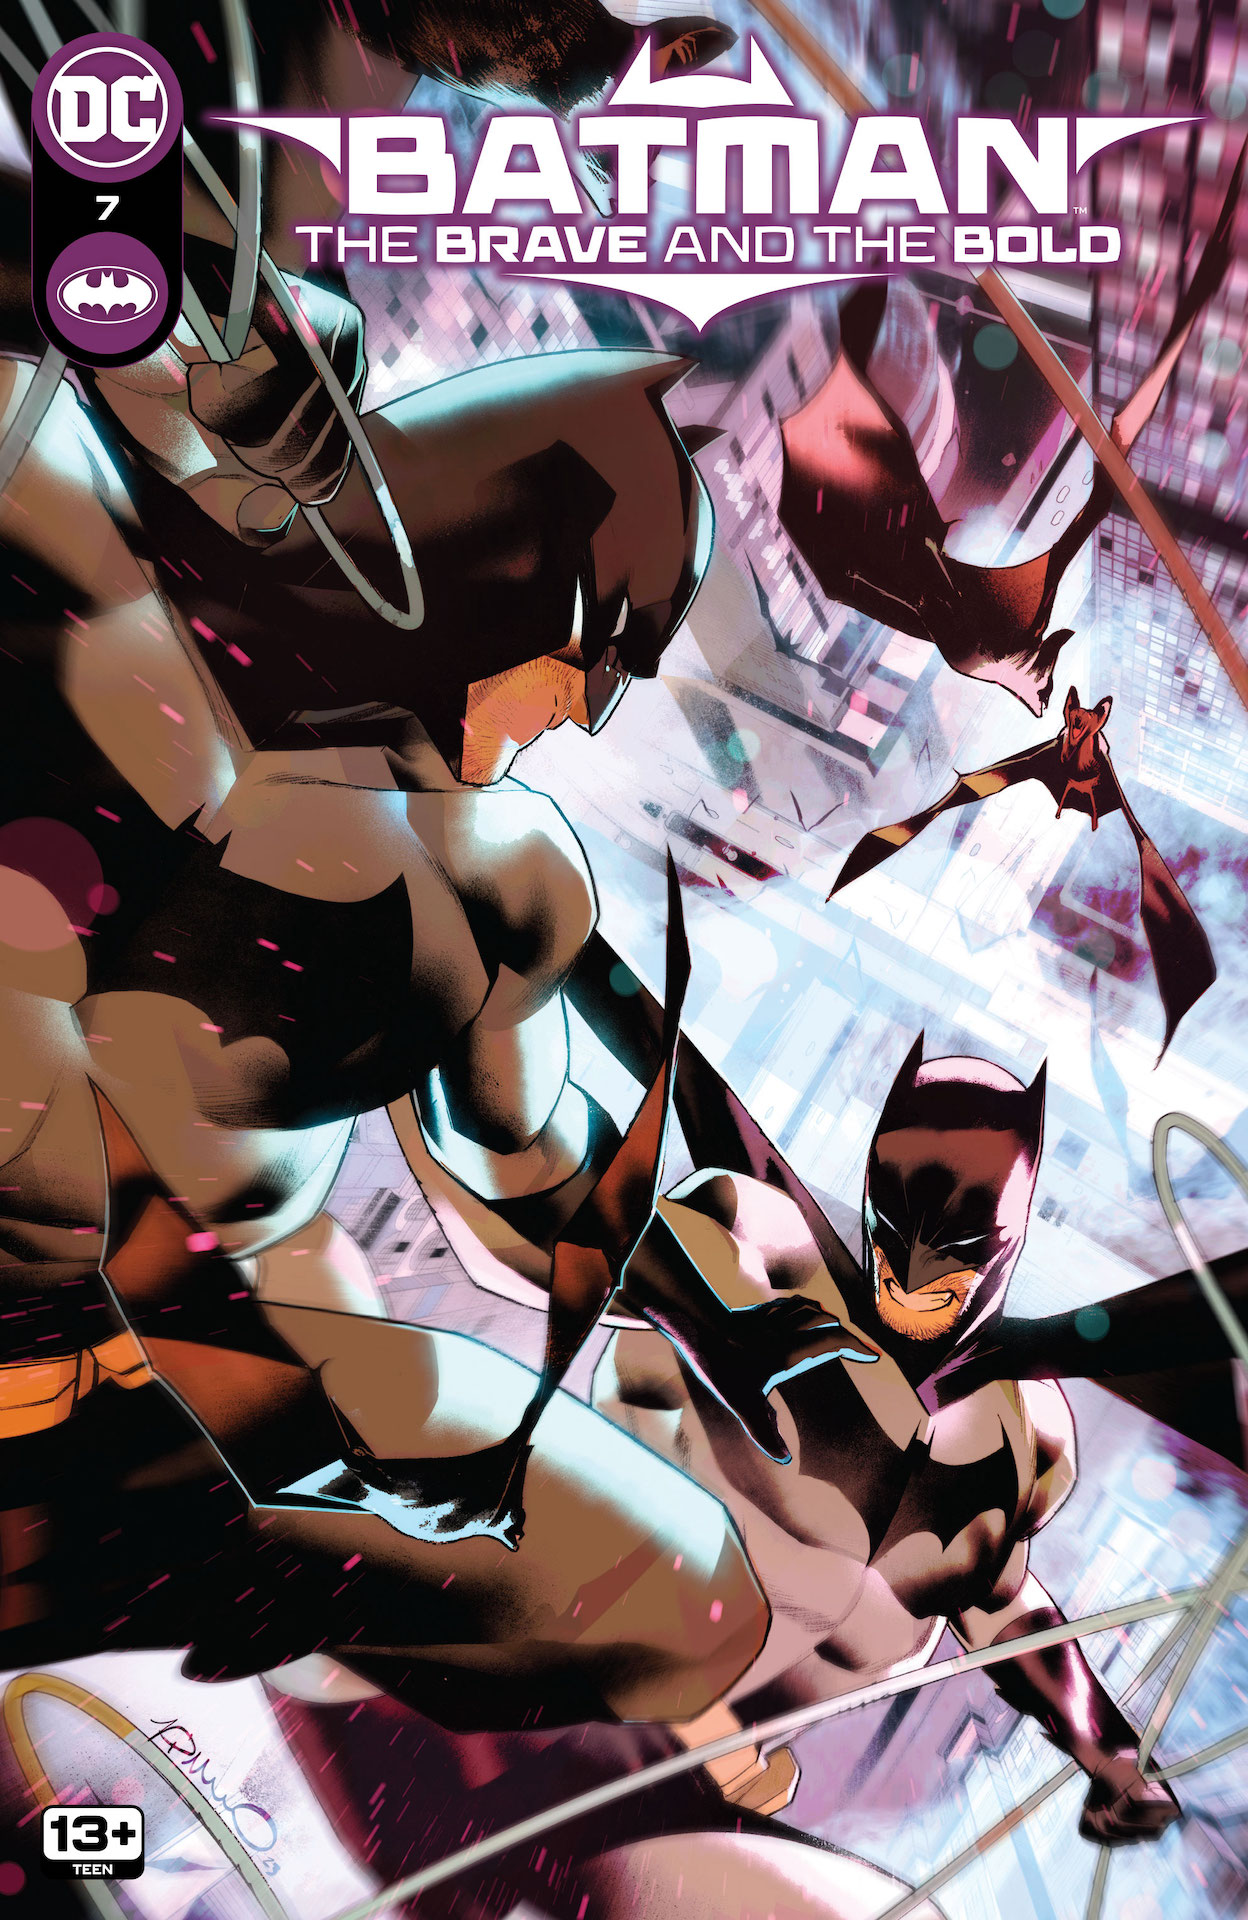 DC Preview: Batman: The Brave and the Bold #7